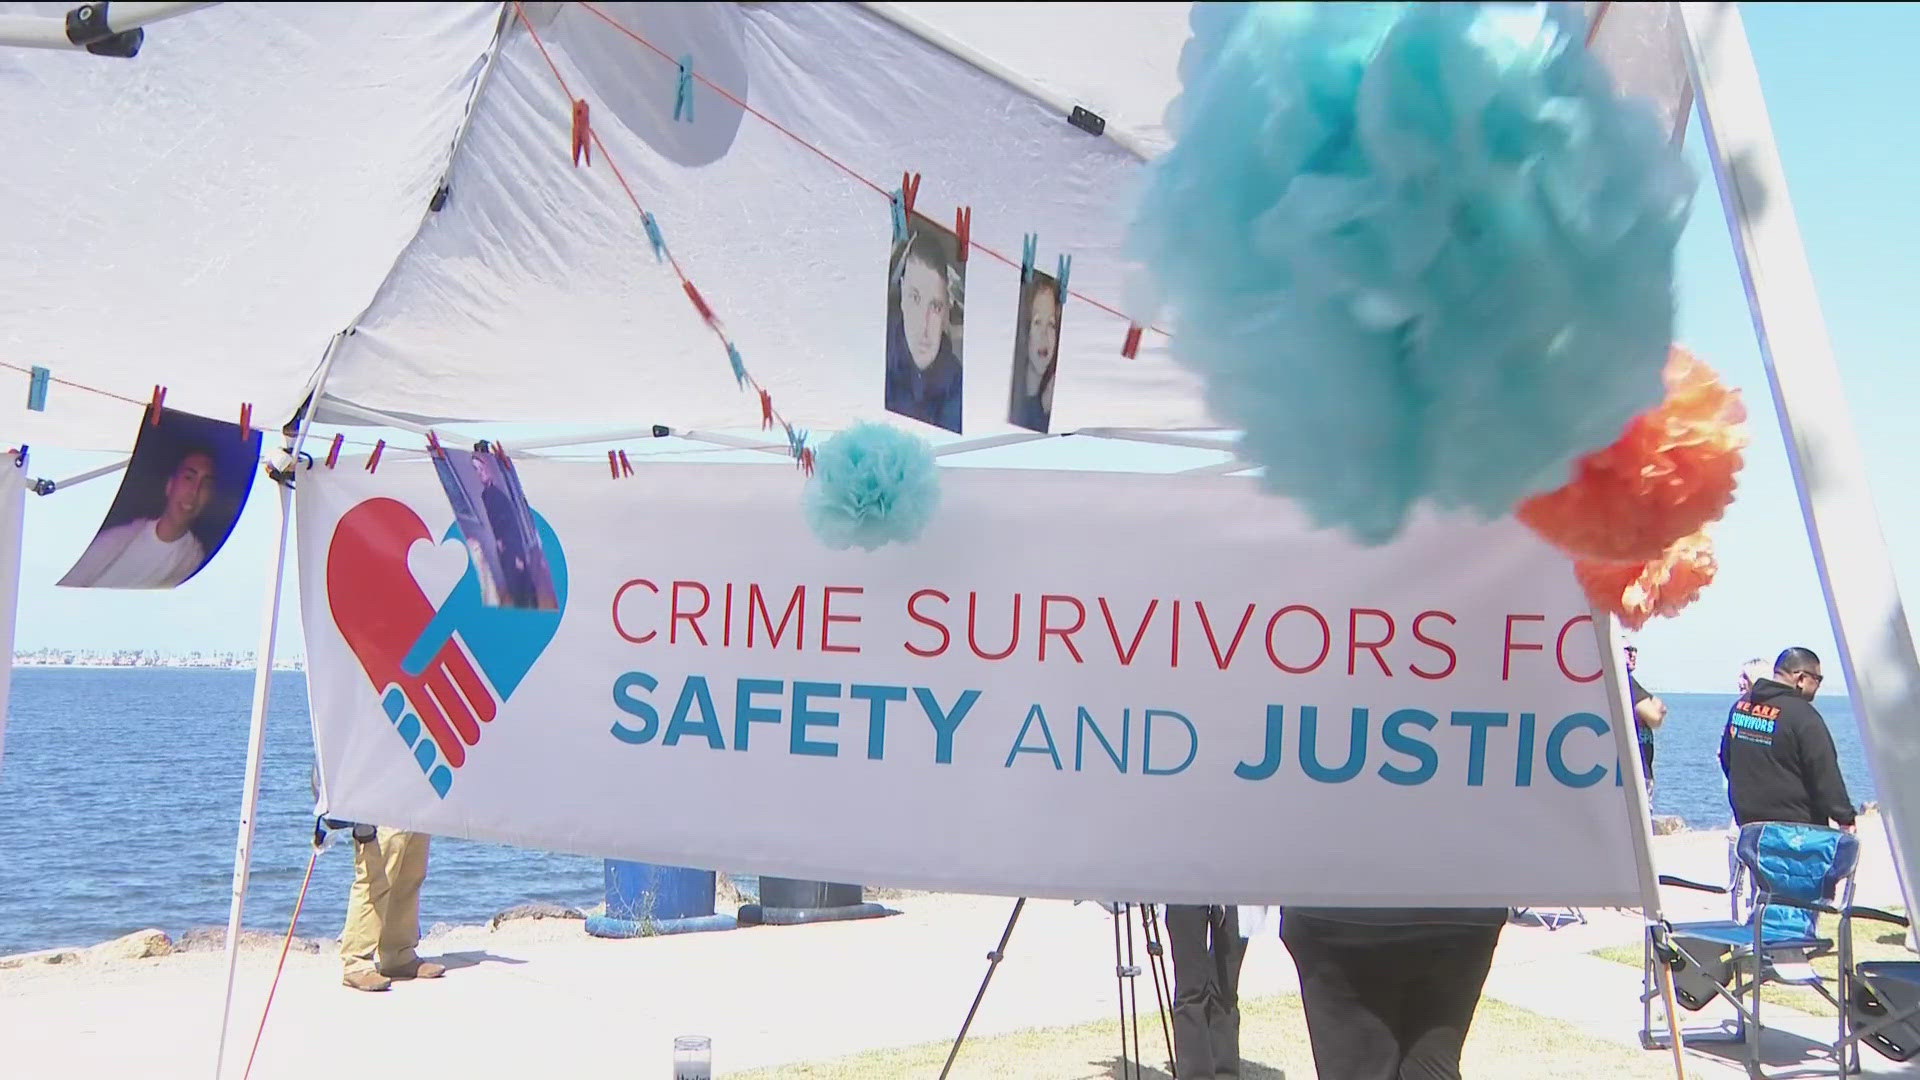 The vigil was hosted by Crime Survivors for Safety and Justice, a national network of crime survivors that’s working to heal communities and shape public policy.